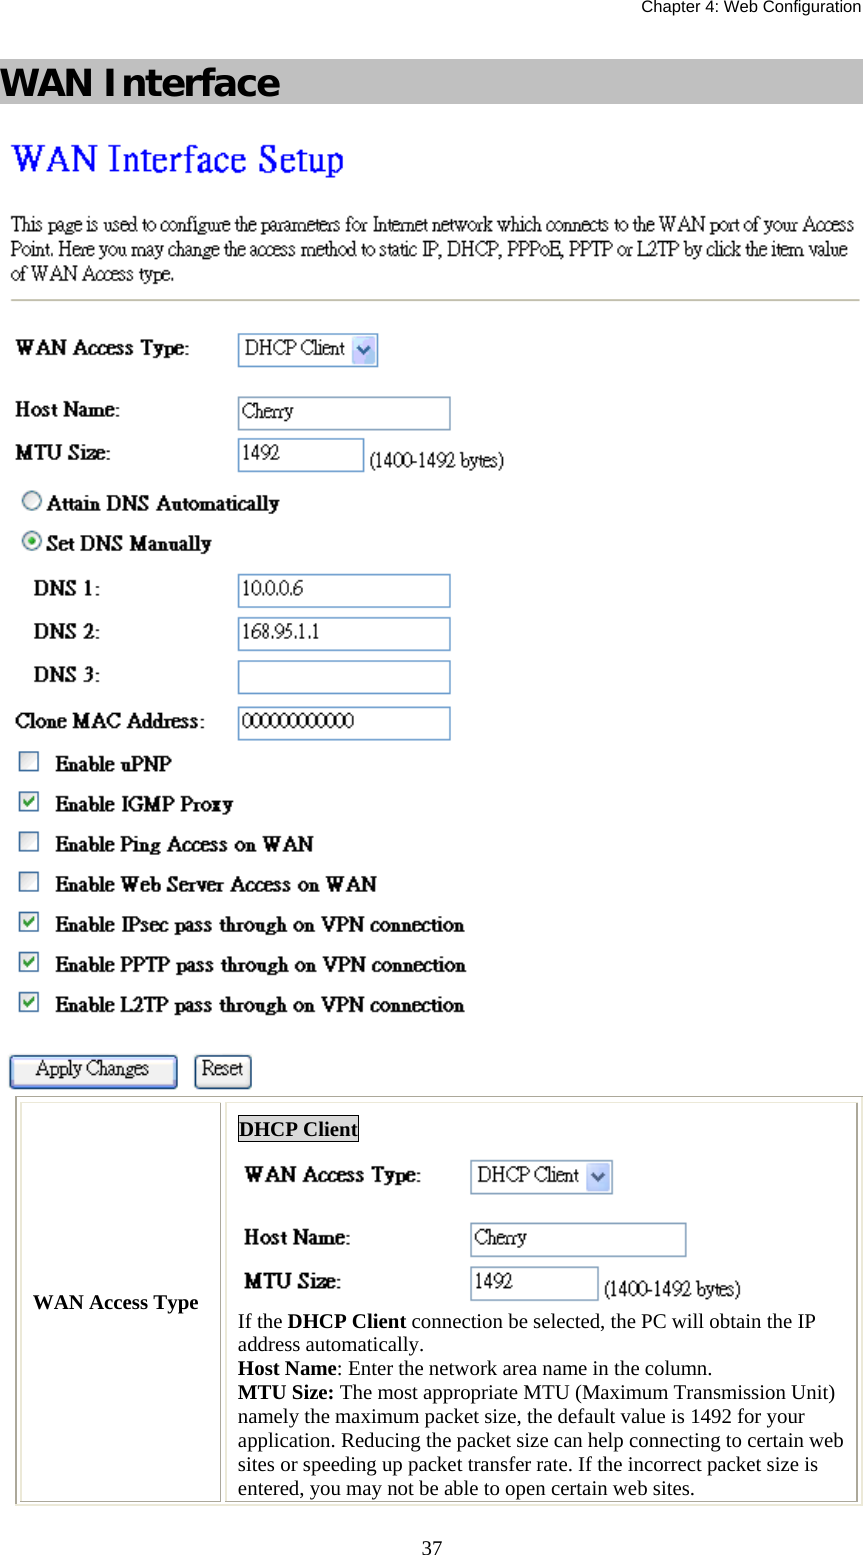   Chapter 4: Web Configuration  37WAN Interface  WAN Access Type DHCP Client  If the DHCP Client connection be selected, the PC will obtain the IP address automatically. Host Name: Enter the network area name in the column. MTU Size: The most appropriate MTU (Maximum Transmission Unit) namely the maximum packet size, the default value is 1492 for your application. Reducing the packet size can help connecting to certain web sites or speeding up packet transfer rate. If the incorrect packet size is entered, you may not be able to open certain web sites. 